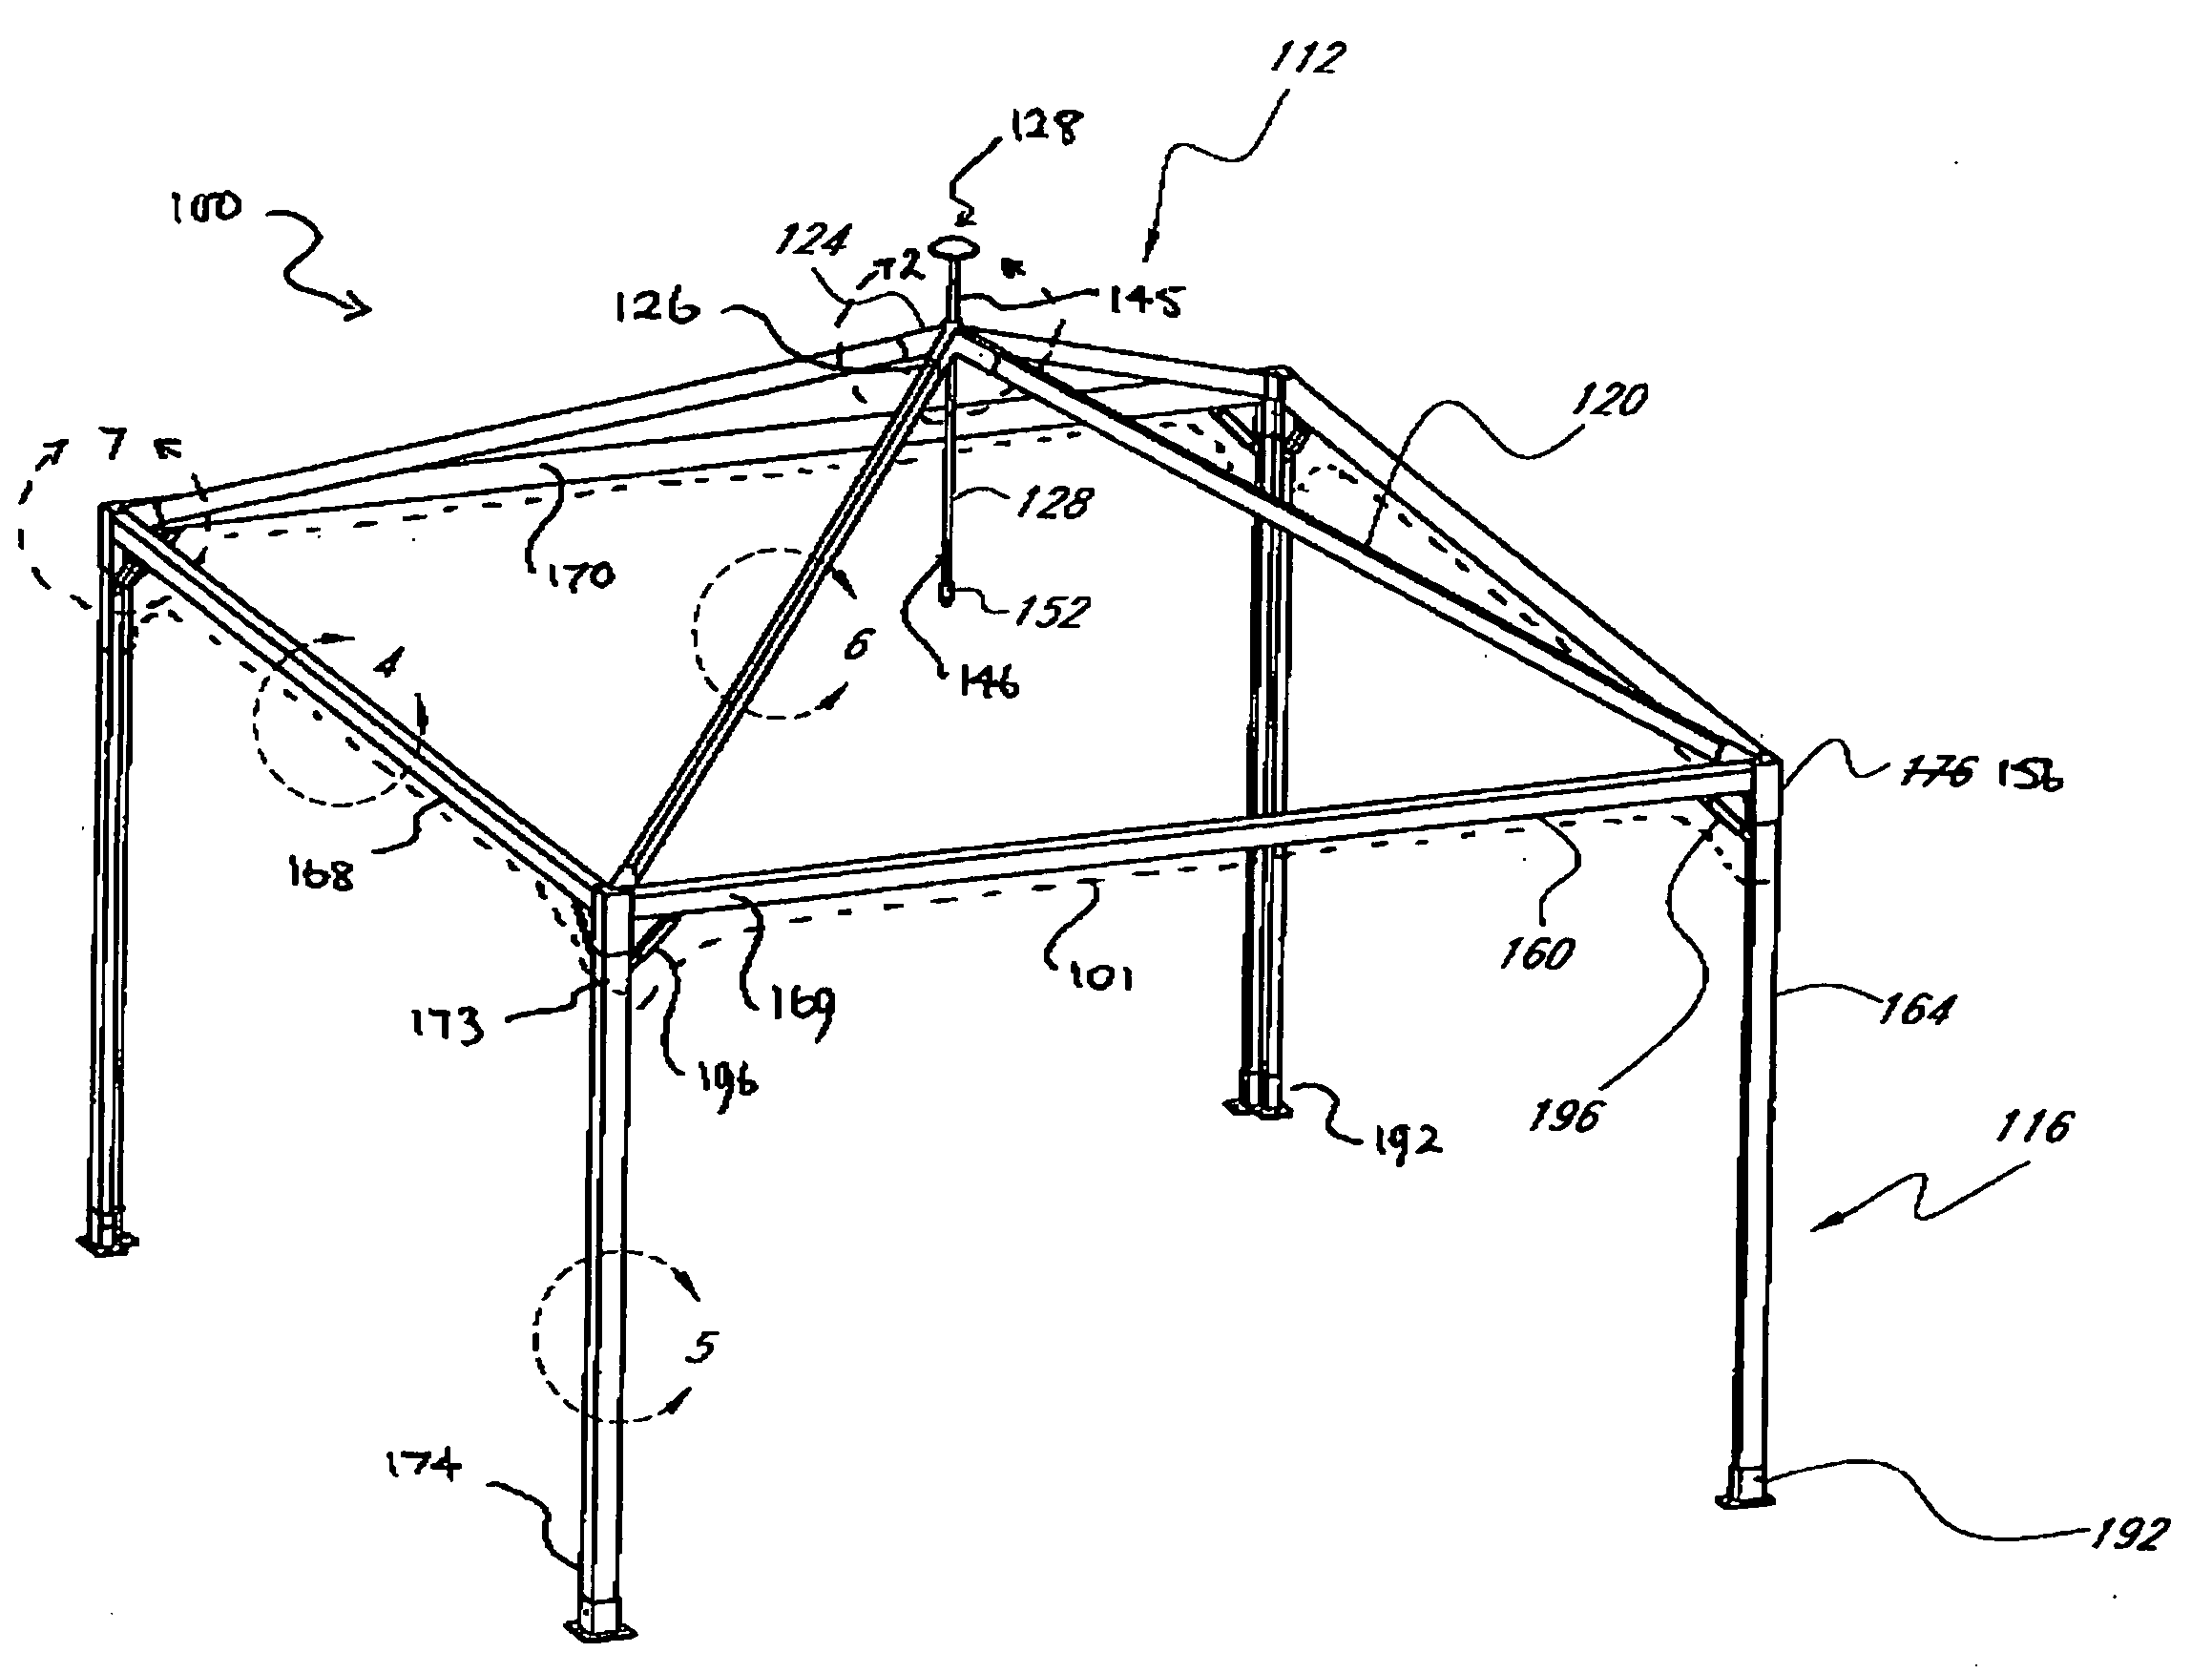 Bases and braces for support poles, such as poles for pavilions and umbrellas